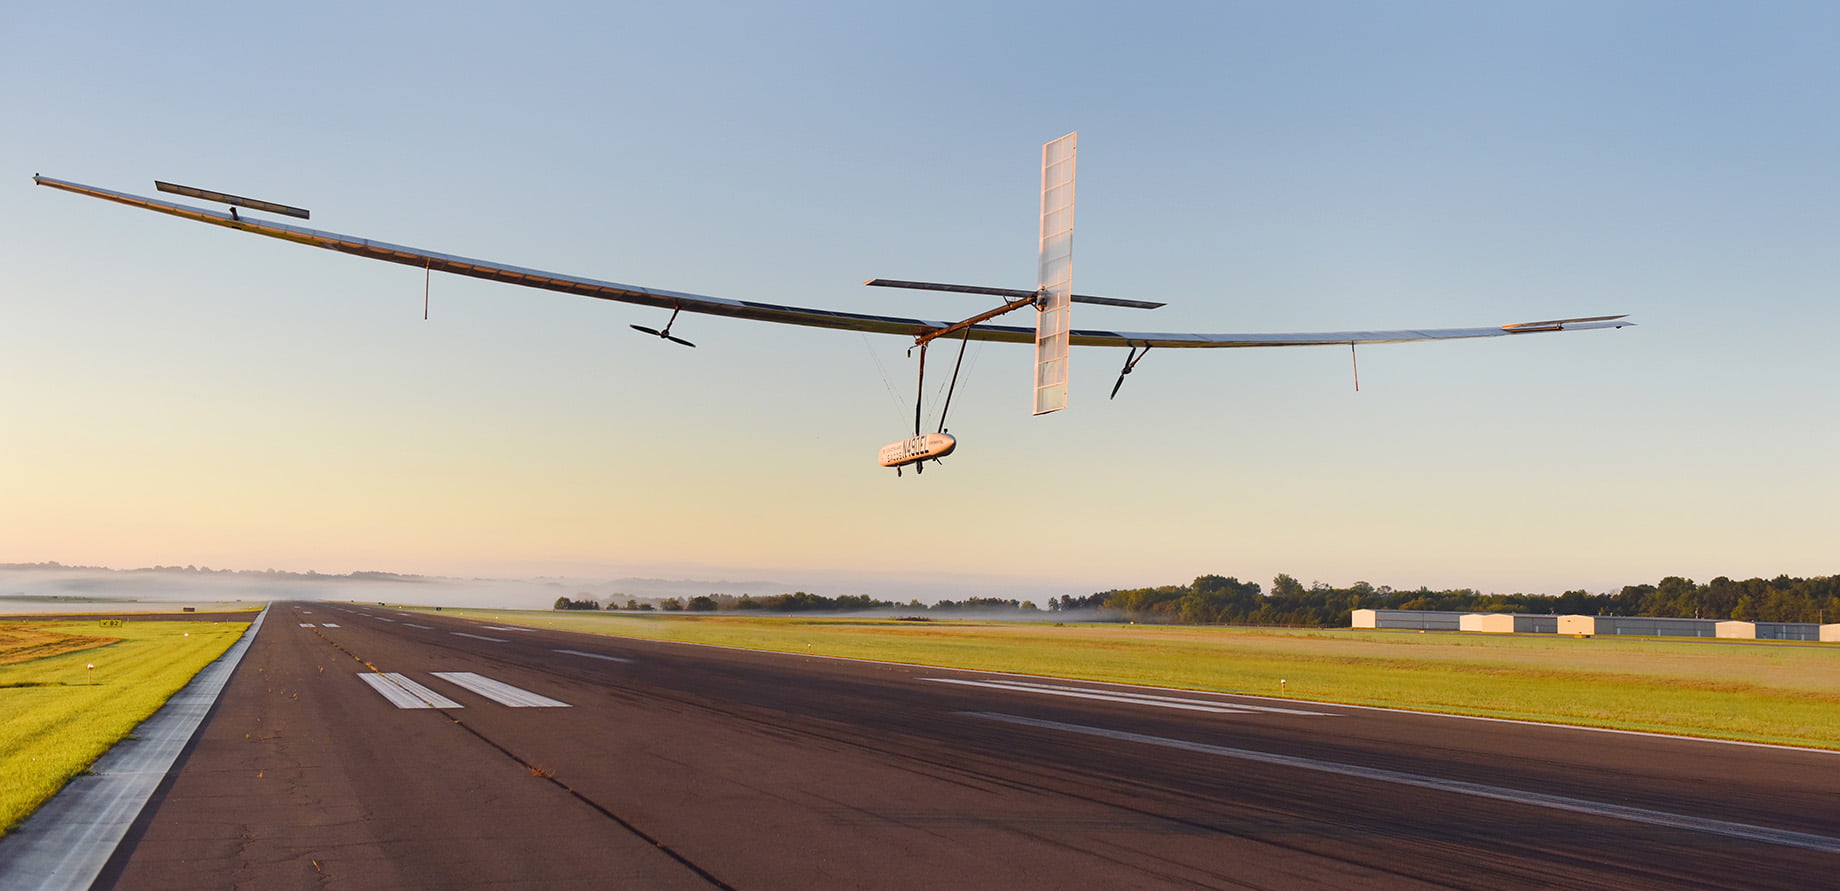 Electra’s unmanned solar-electric hybrid “Dawn One” research aircraft taking off on its maiden flight from Electra’s development facility in Manassas, VA.